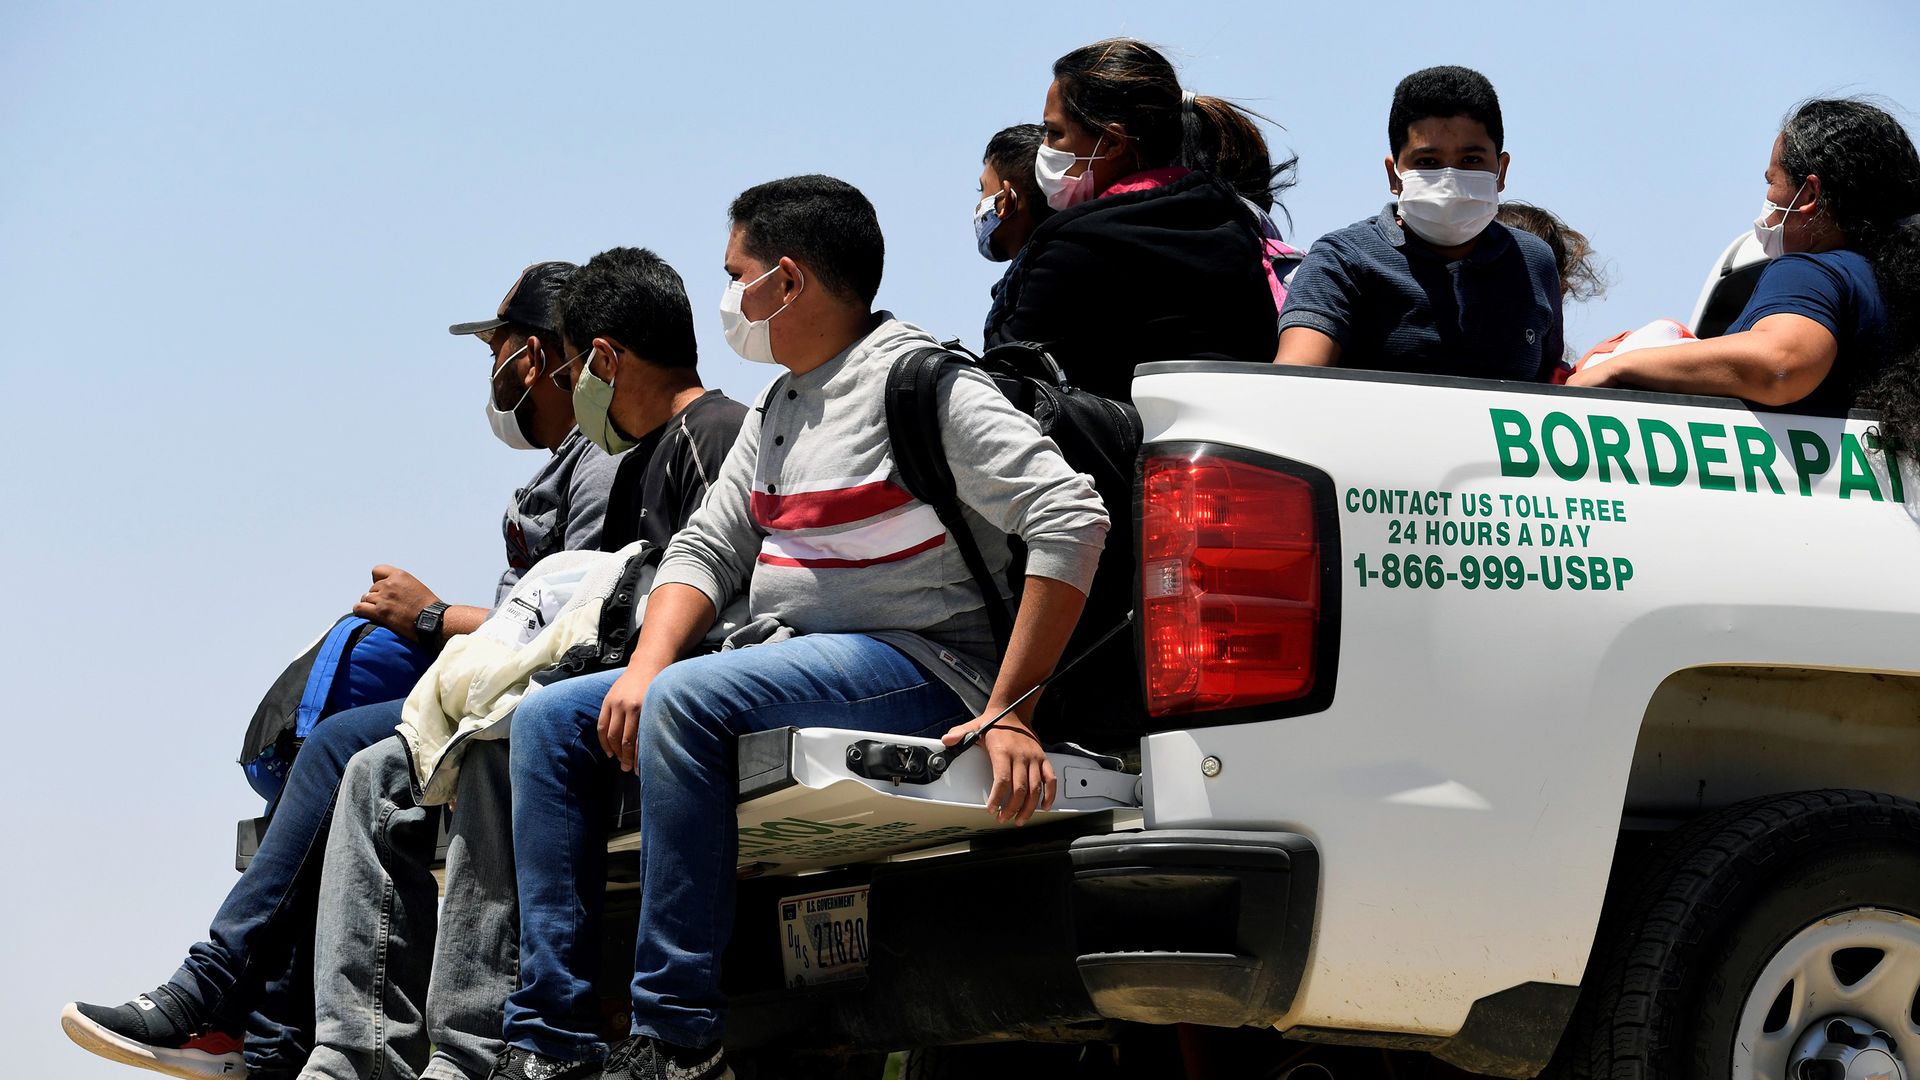 Migrants attempting to cross in to the U.S. from Mexico are detained by U.S. Customs and Border Protection at the border 